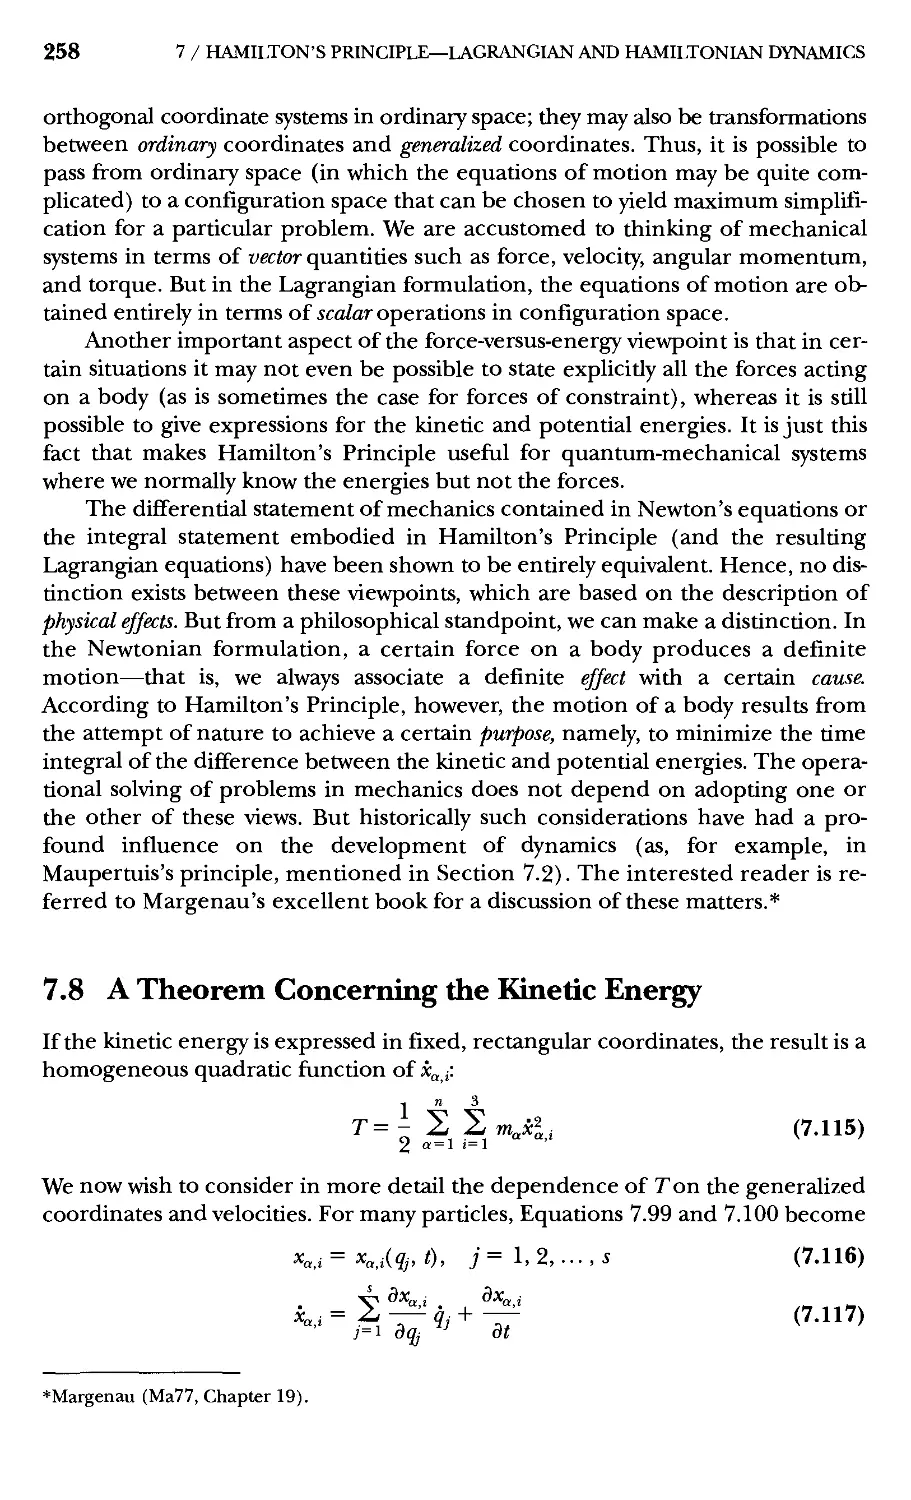 7.11 Some Comments Regarding Dynamical Variables and Variational Calculations in Physics